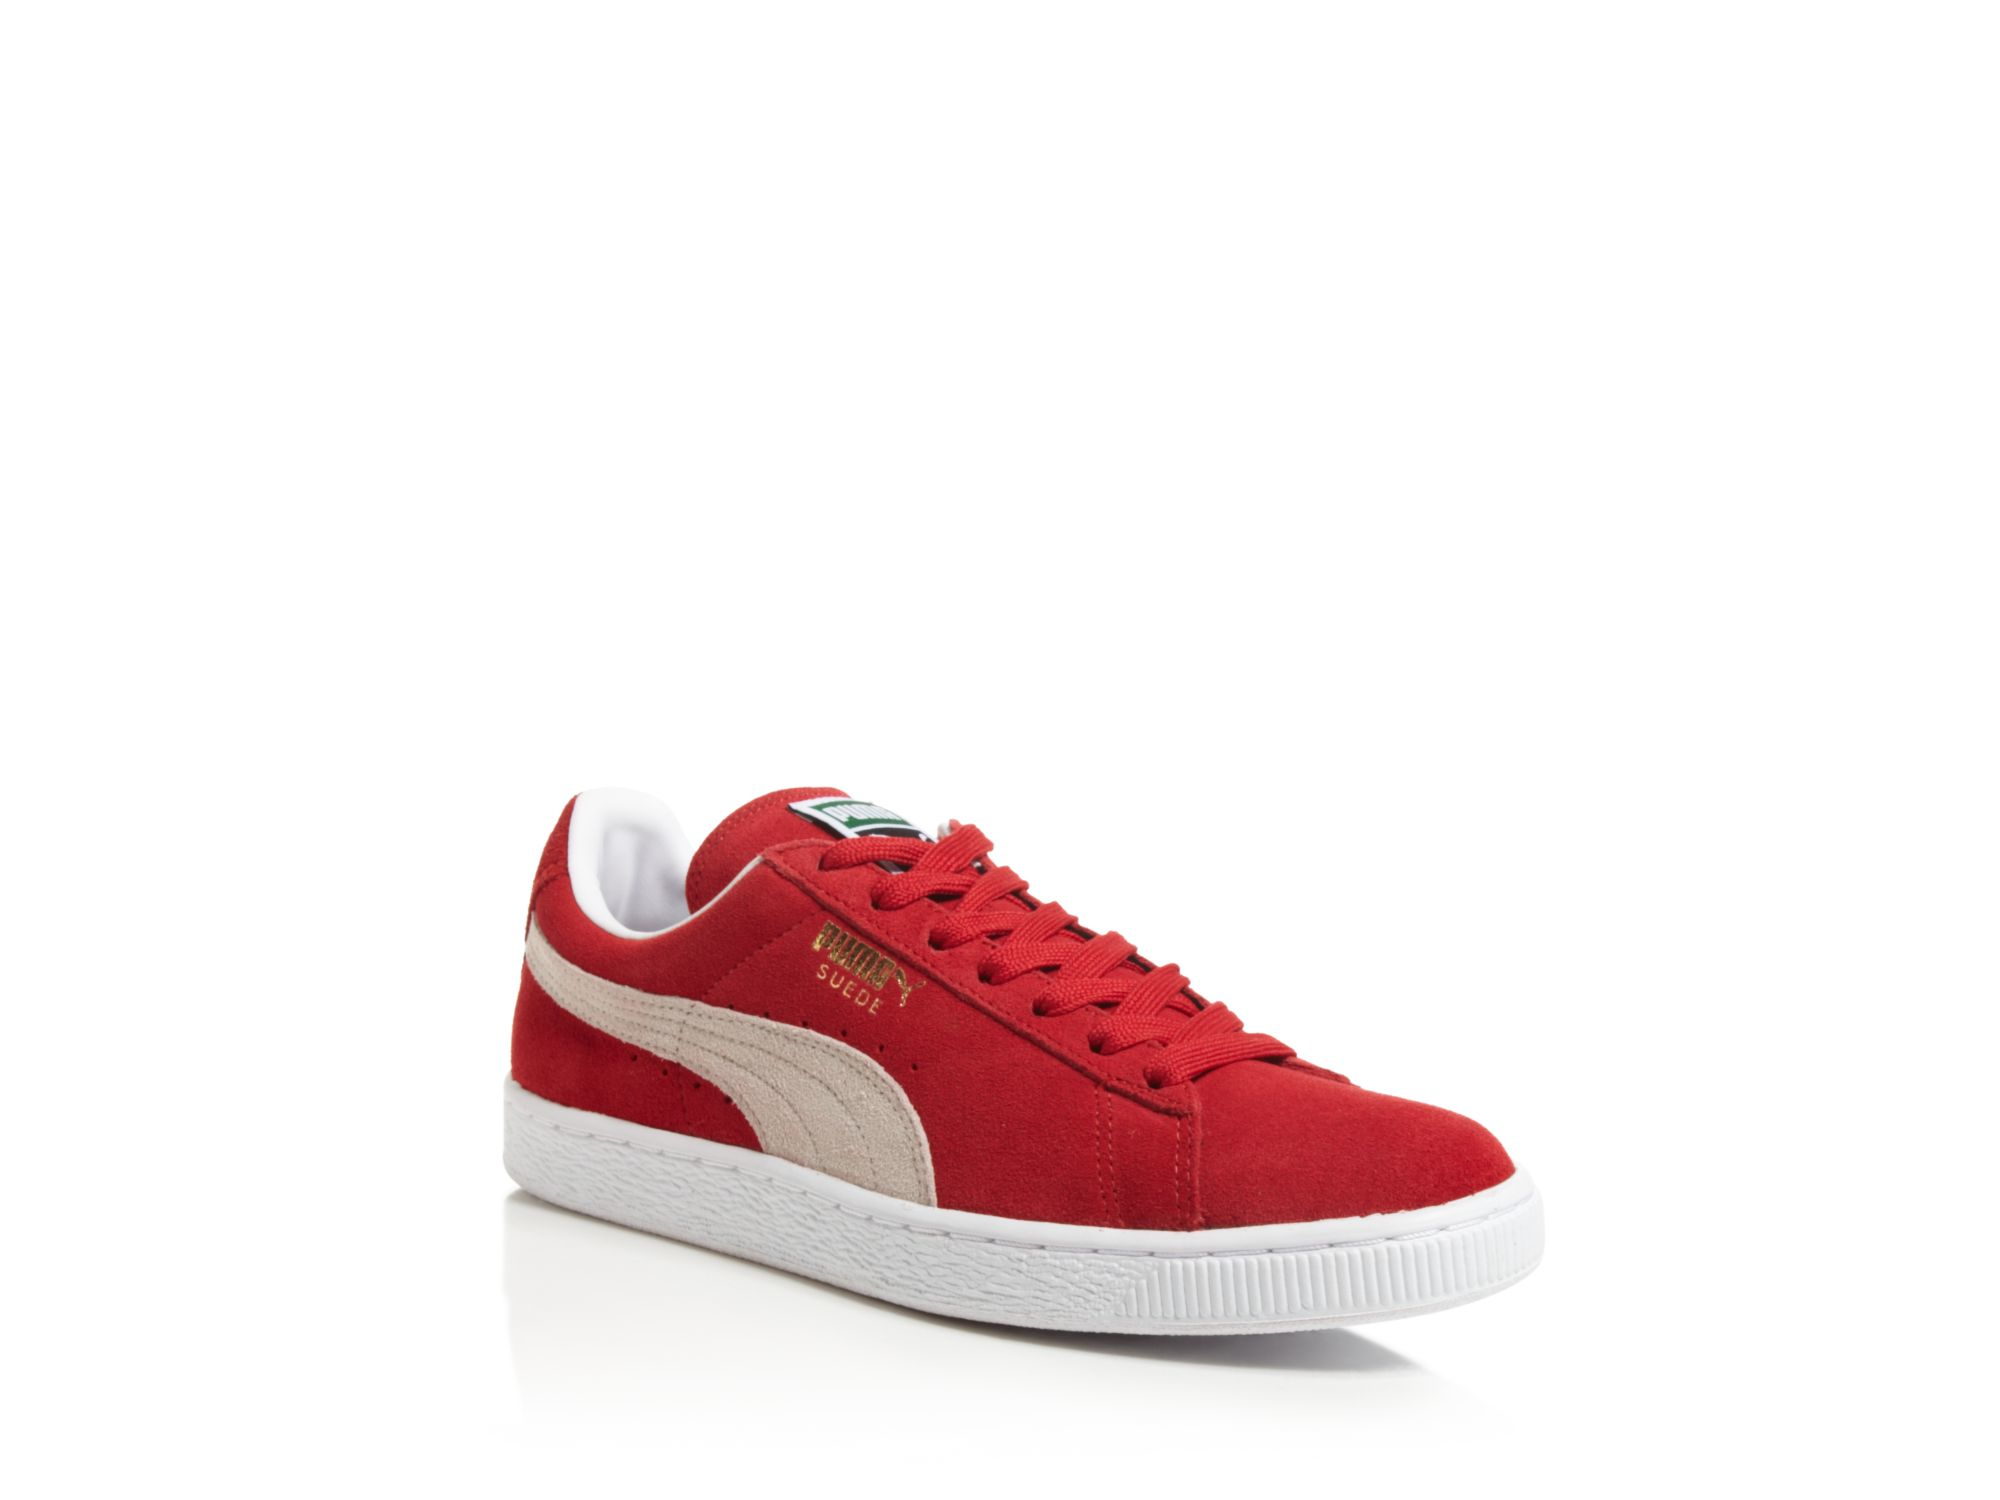 Lyst - Puma Suede Classic Sneakers in Red for Men